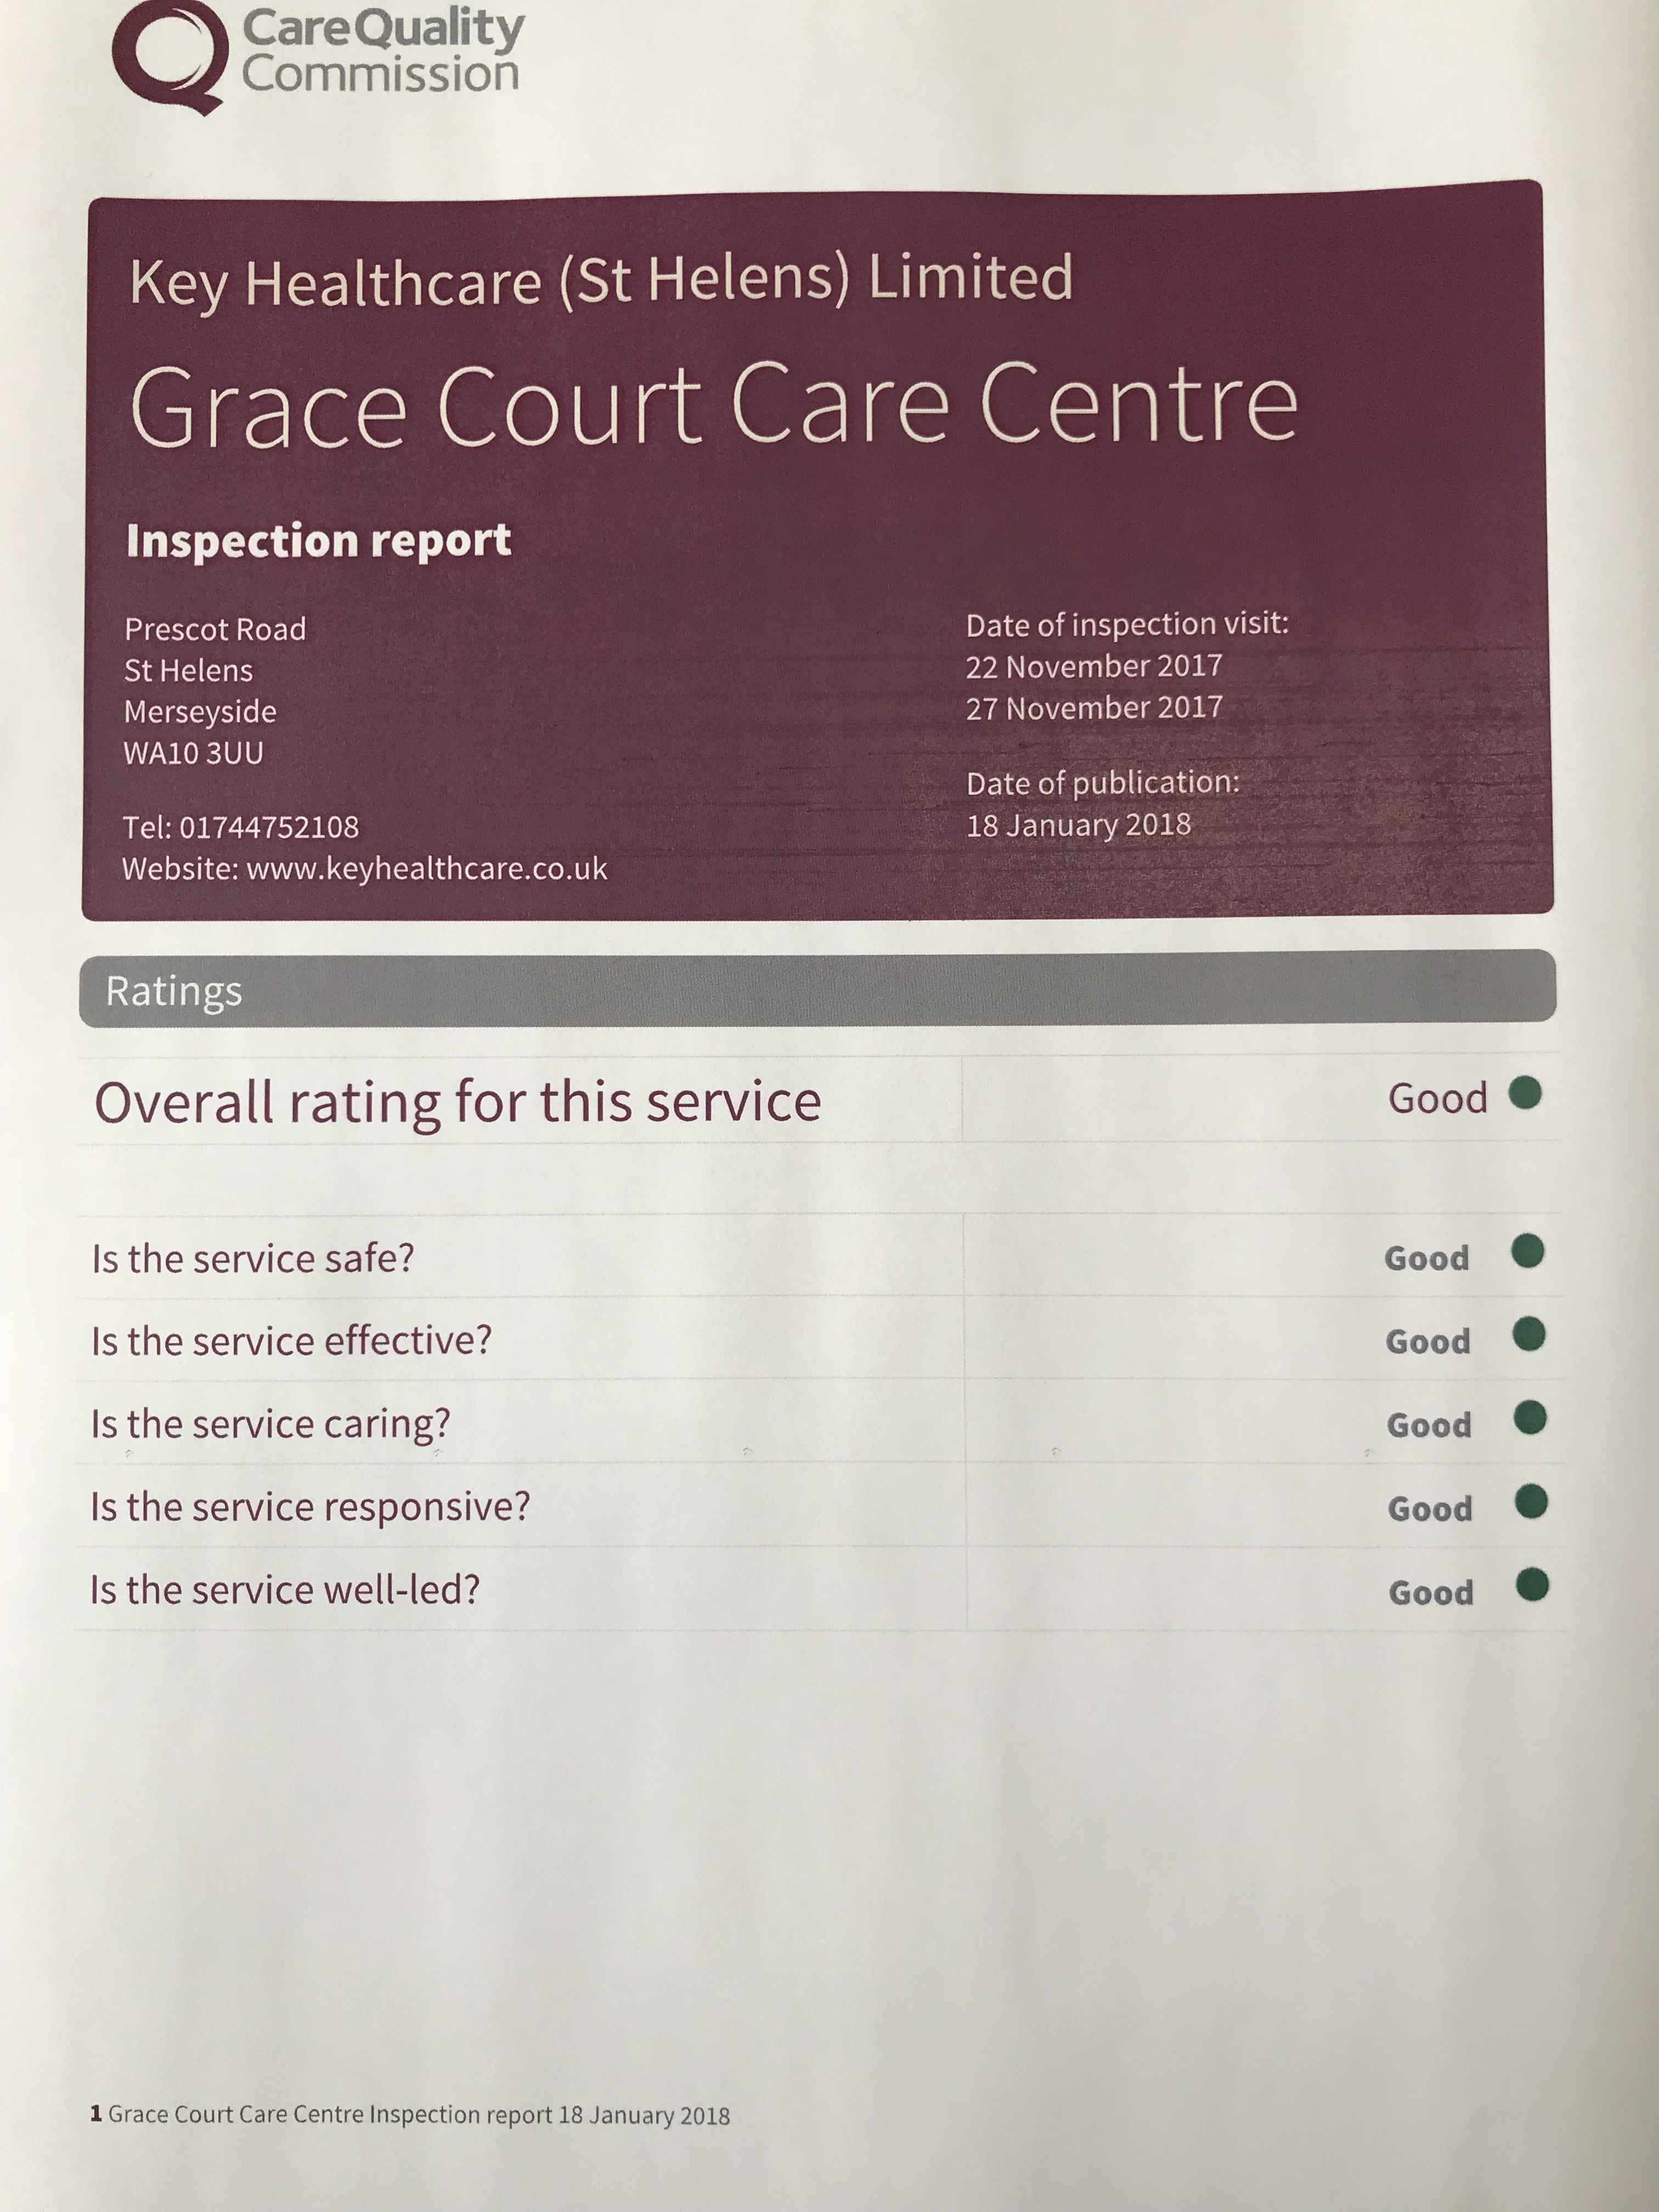 Congratulations Grace Court Care Centre: Key Healthcare is dedicated to caring for elderly residents in safe. We have multiple dementia care homes including our care home middlesbrough, our care home St. Helen and care home saltburn. We excel in monitoring and improving care levels.